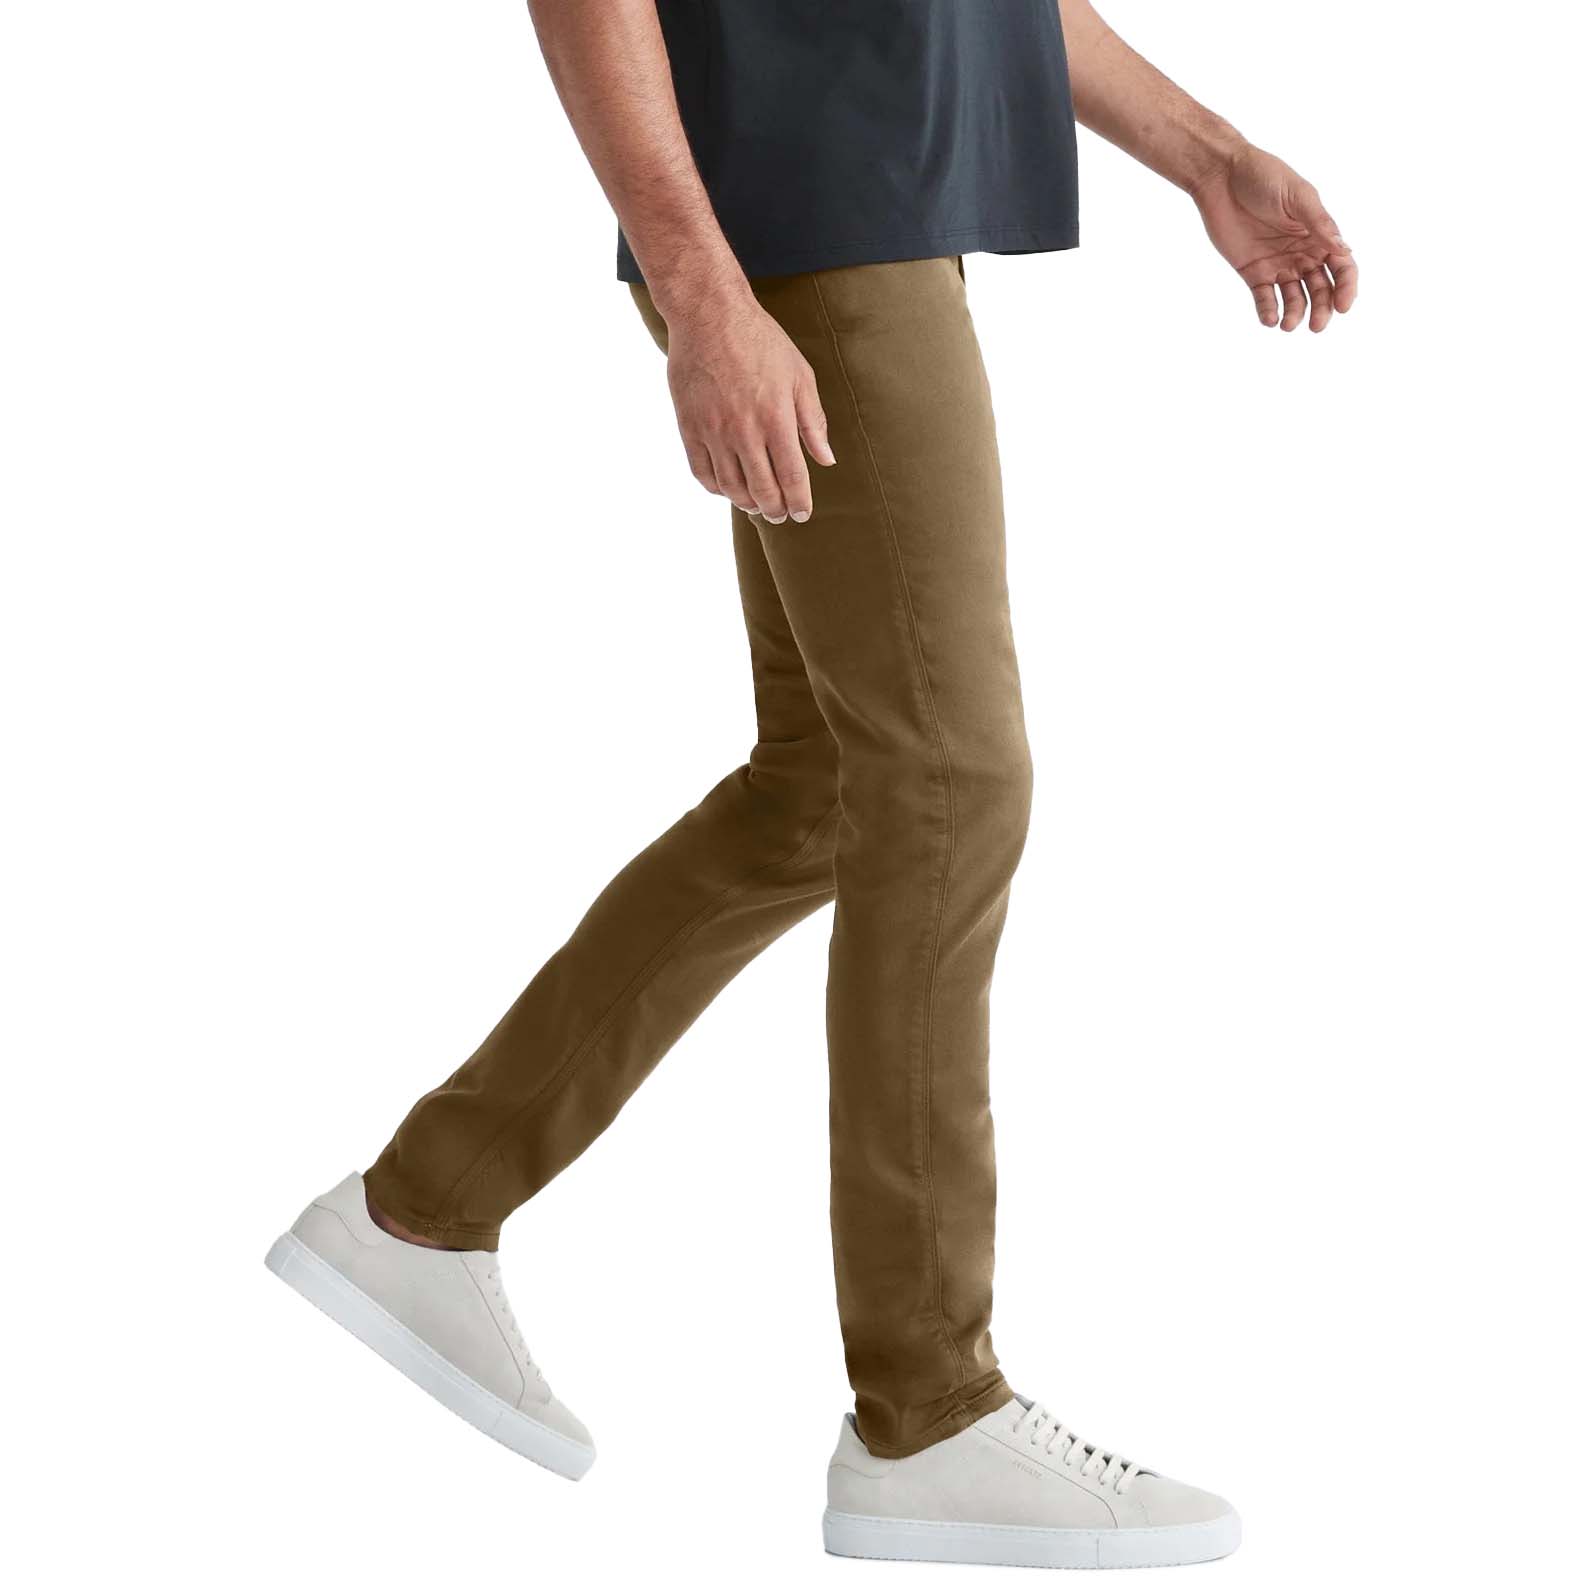 Duer No Sweat Pant Slim Fit Trousers